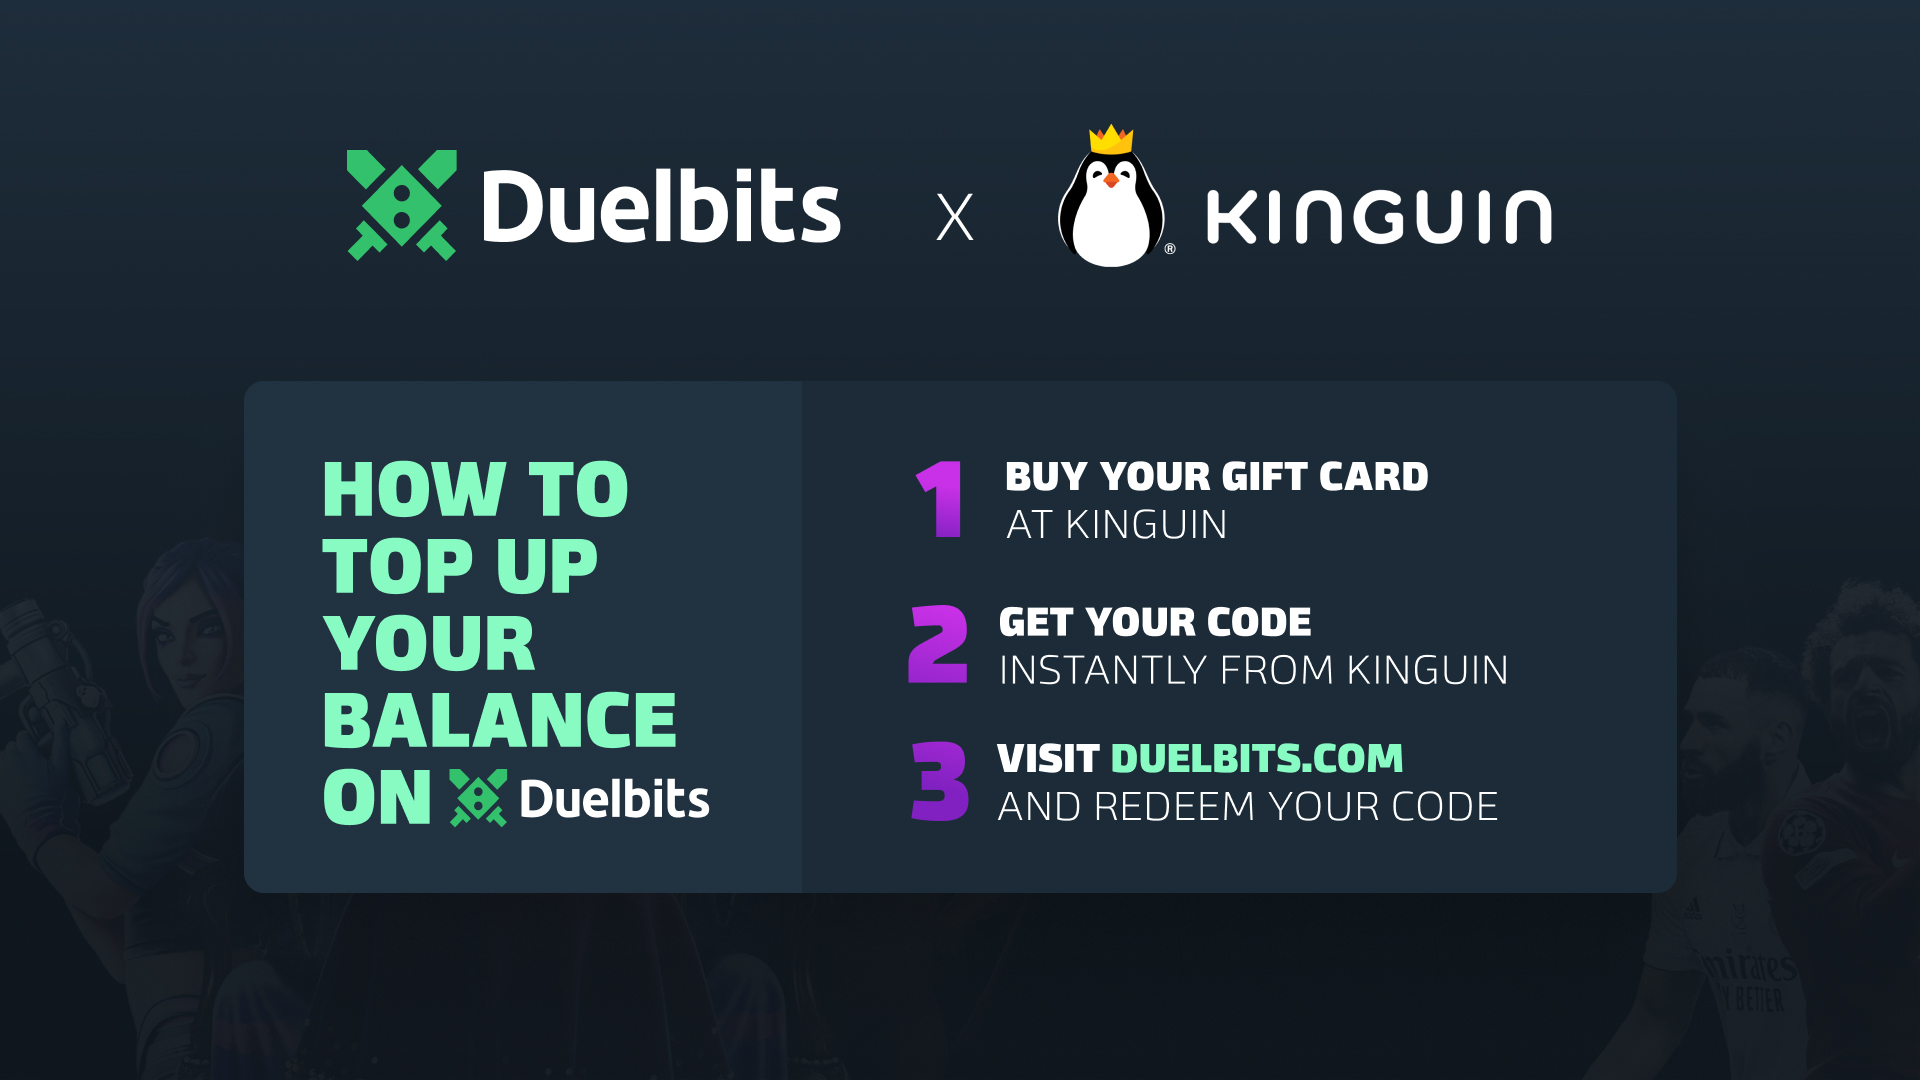 DuelBits $5 Gift Card 6.27 usd